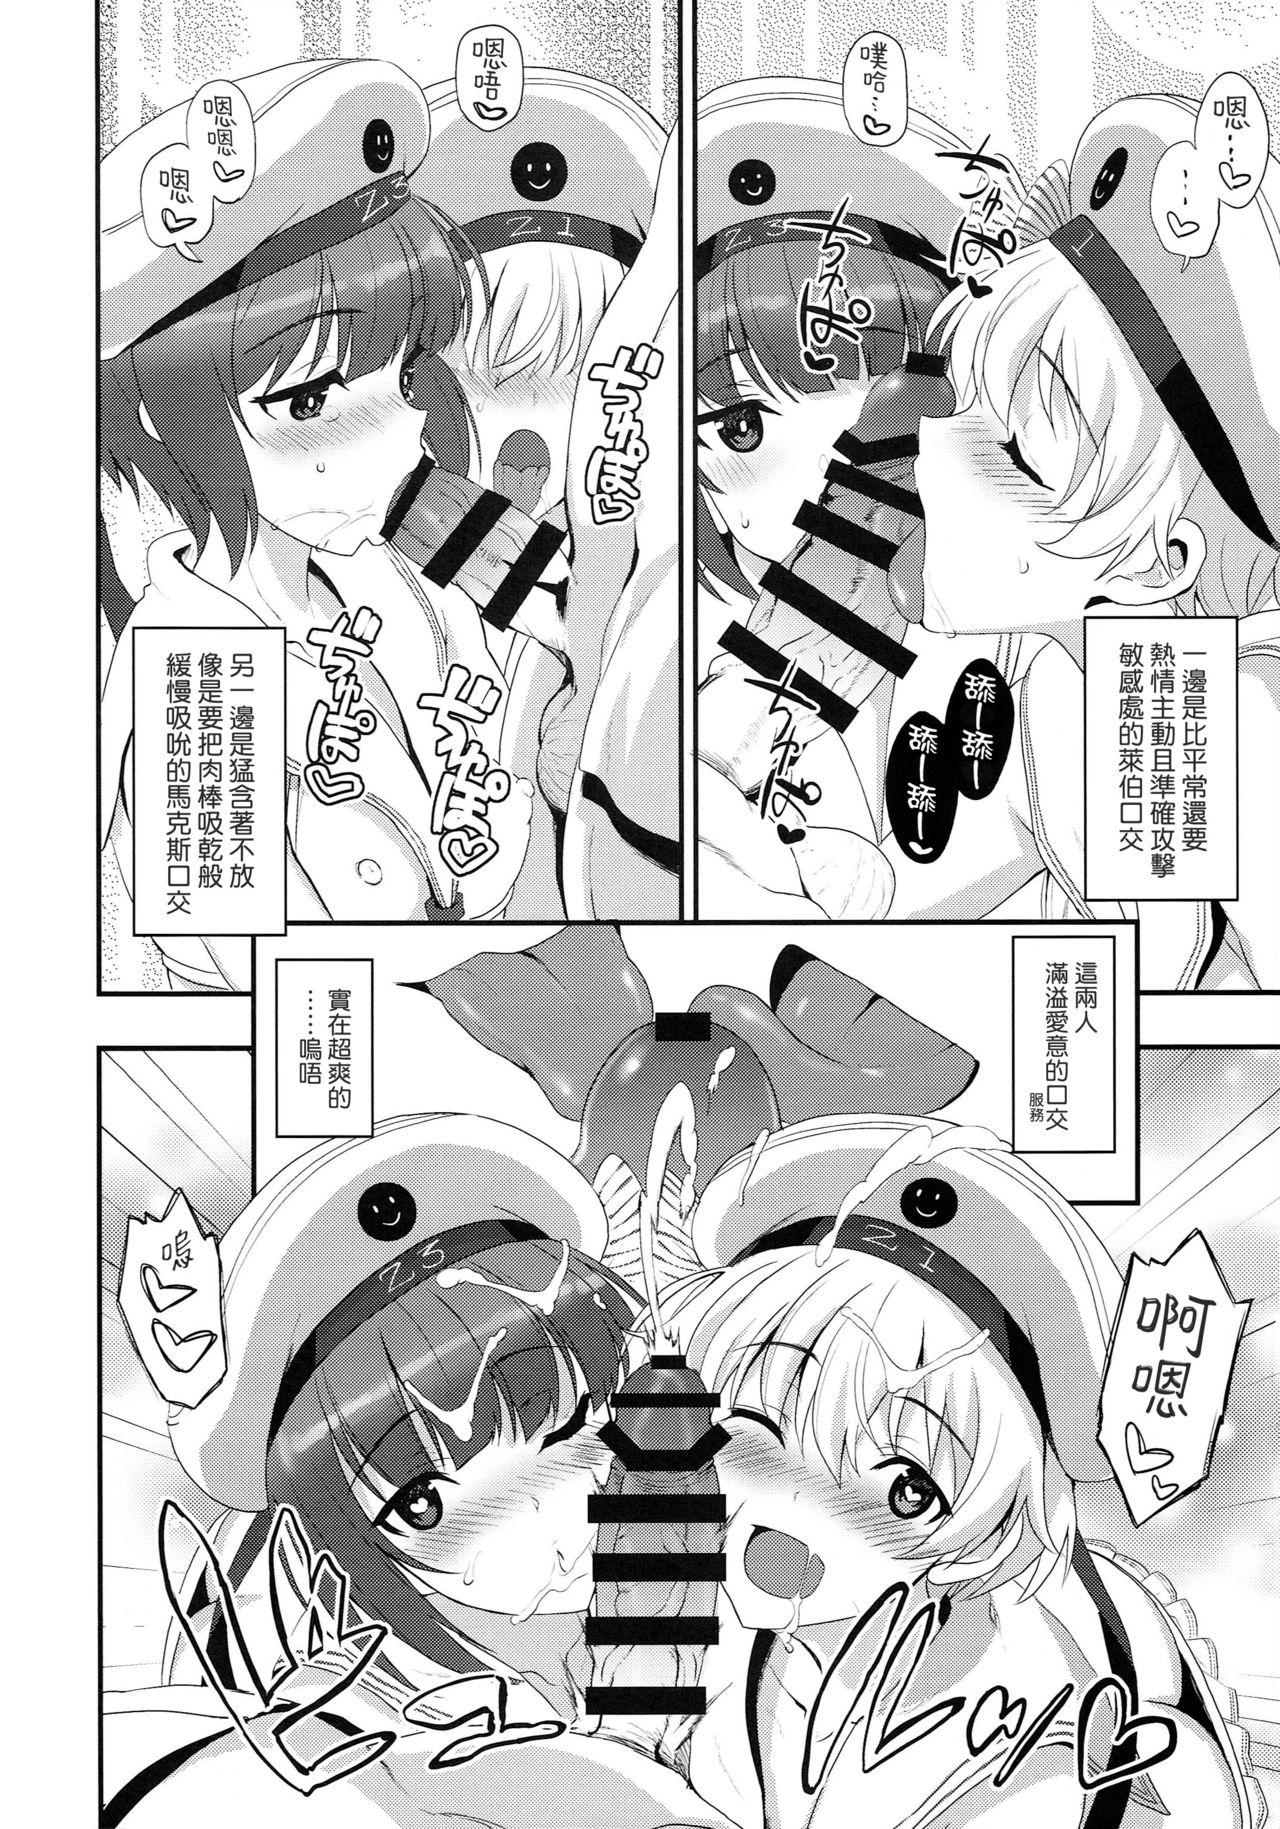 Pussy Apfelschorle - Kantai collection Wank - Page 8